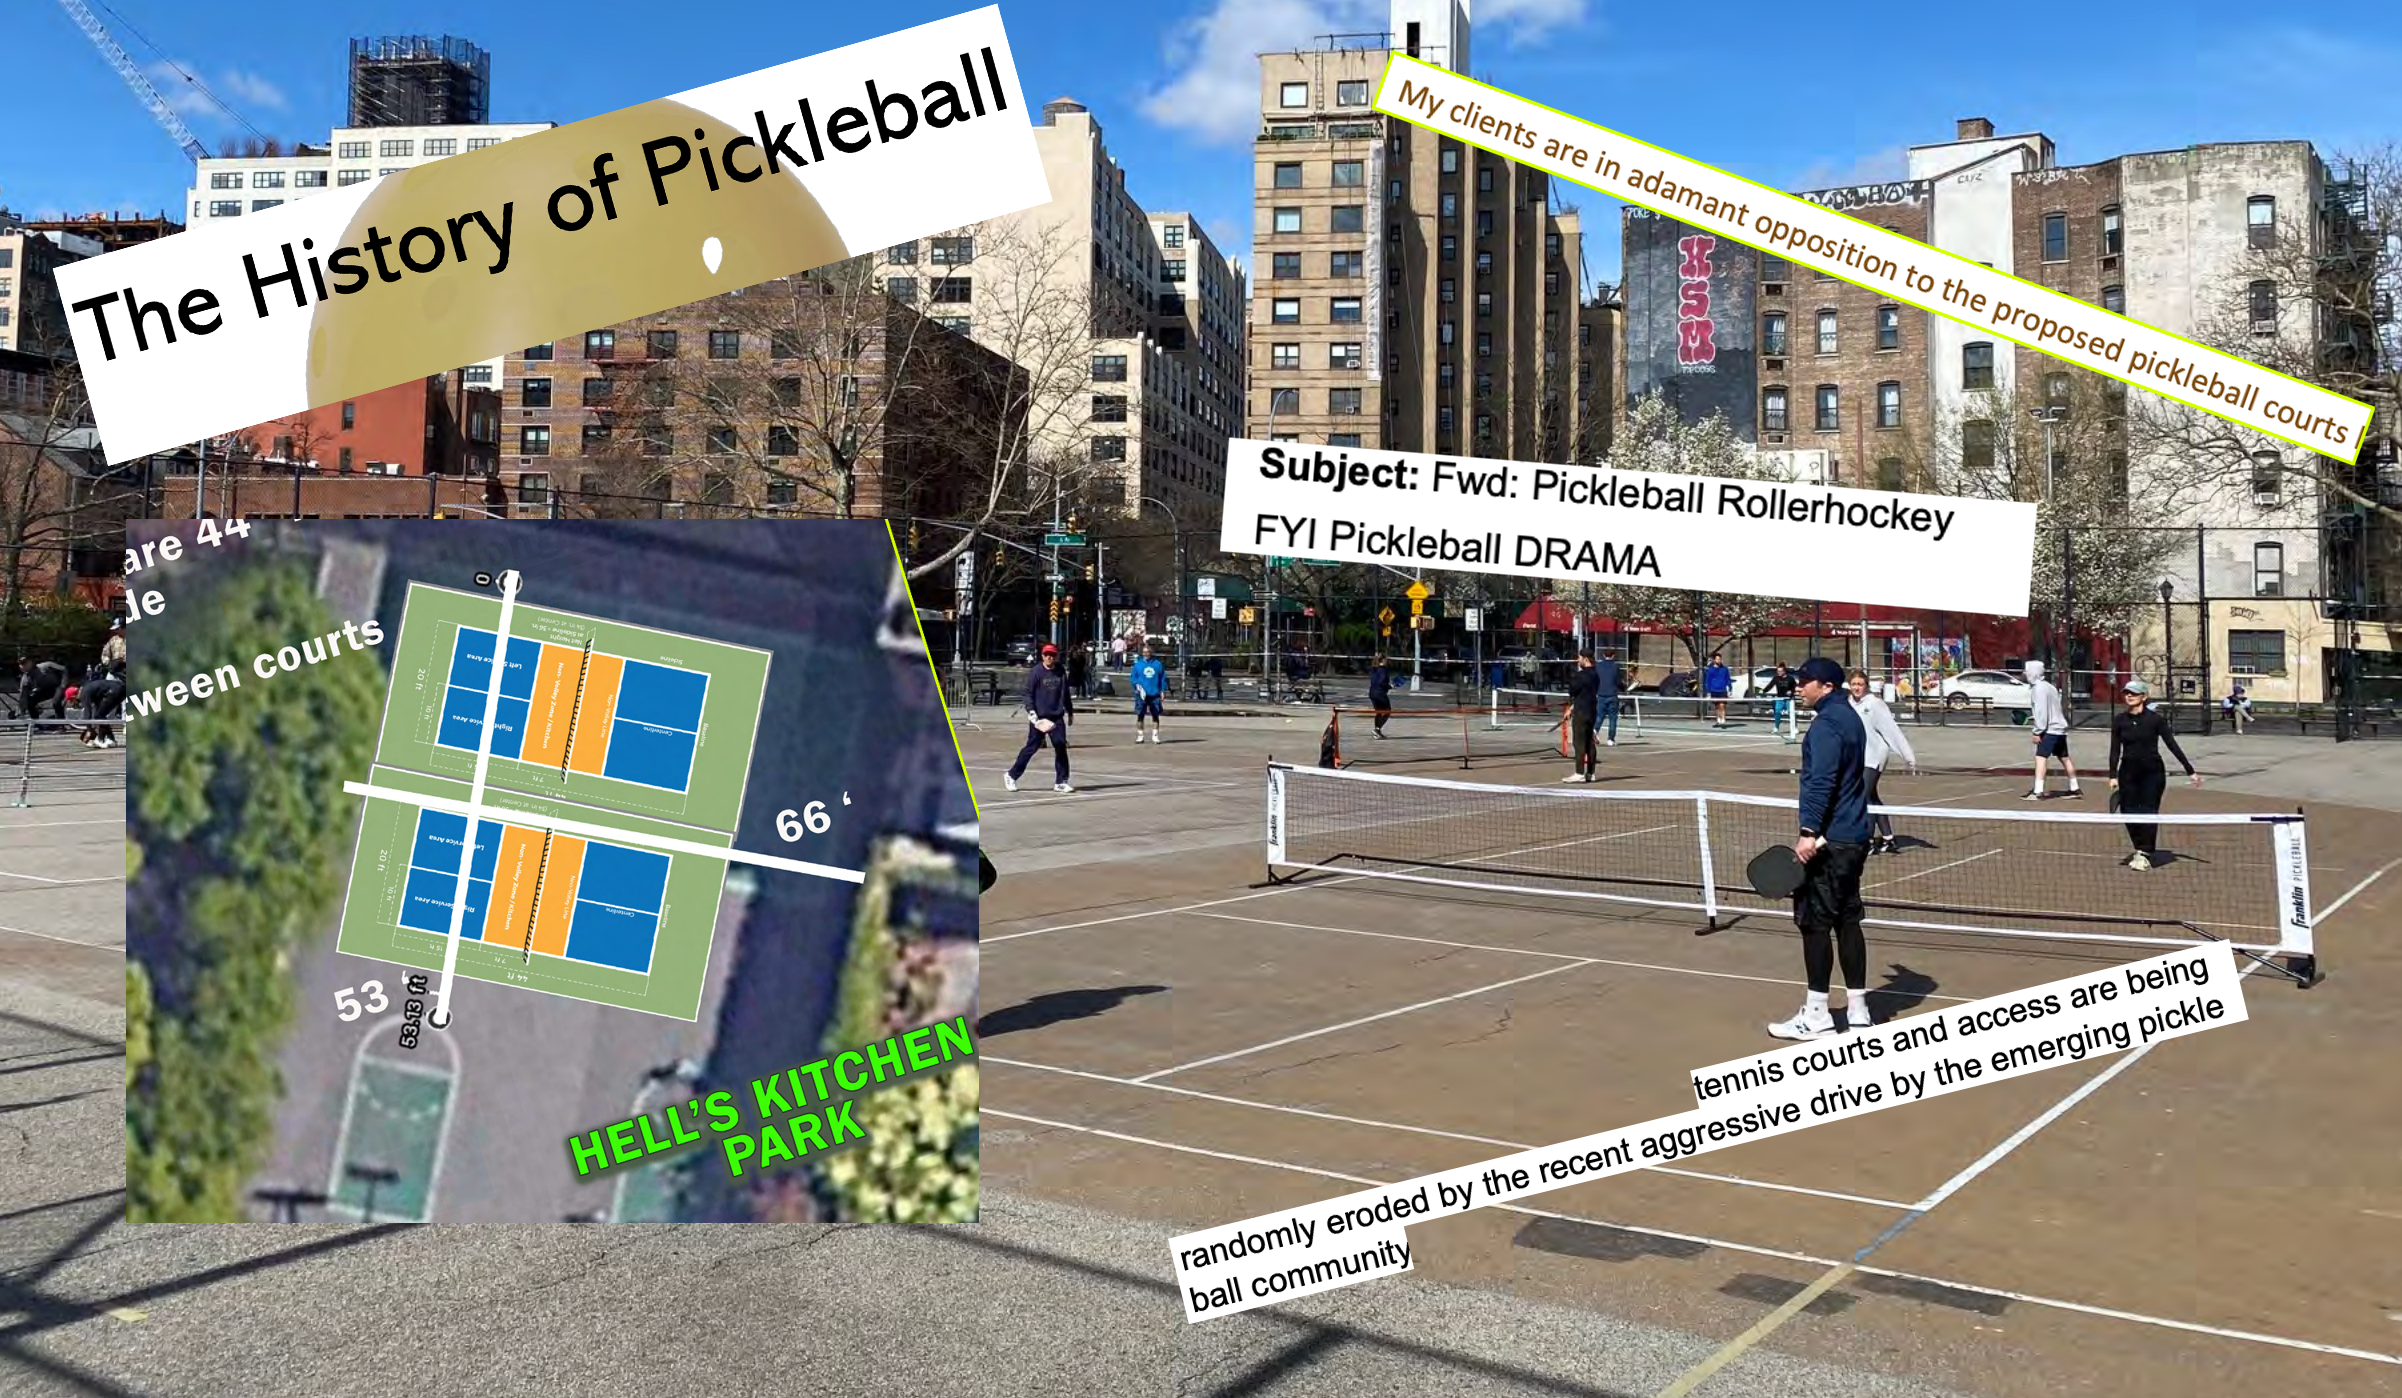 'FYI Pickleball DRAMA': Local Governments Overwhelmed By Tennis-Pickleball Turf Wars, Documents Show